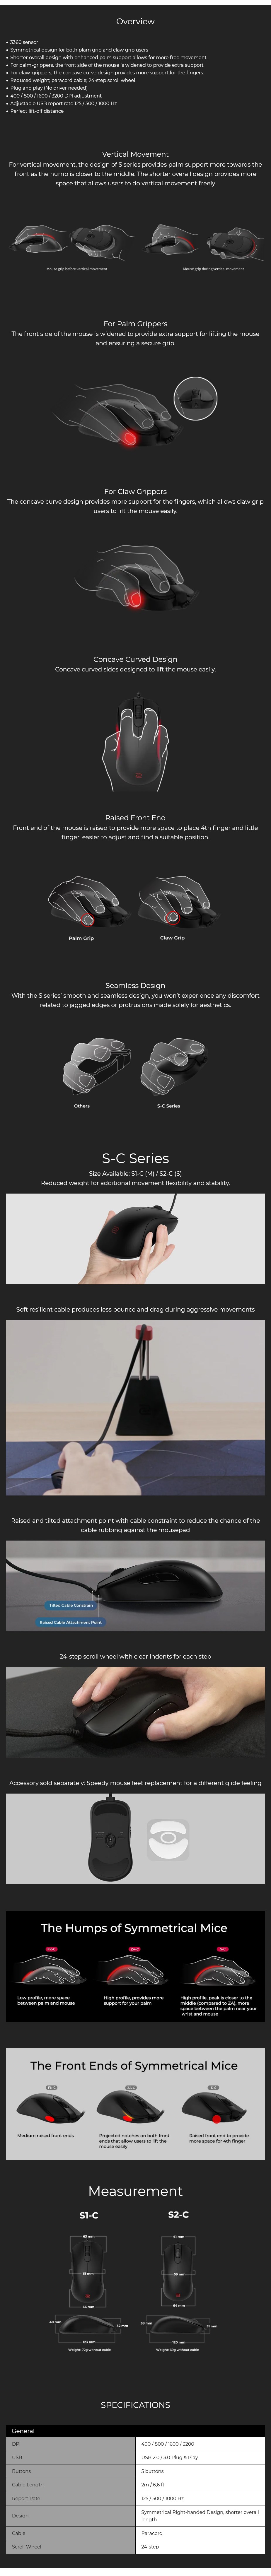 A large marketing image providing additional information about the product BenQ ZOWIE S1-C Esports Gaming Mouse - Additional alt info not provided